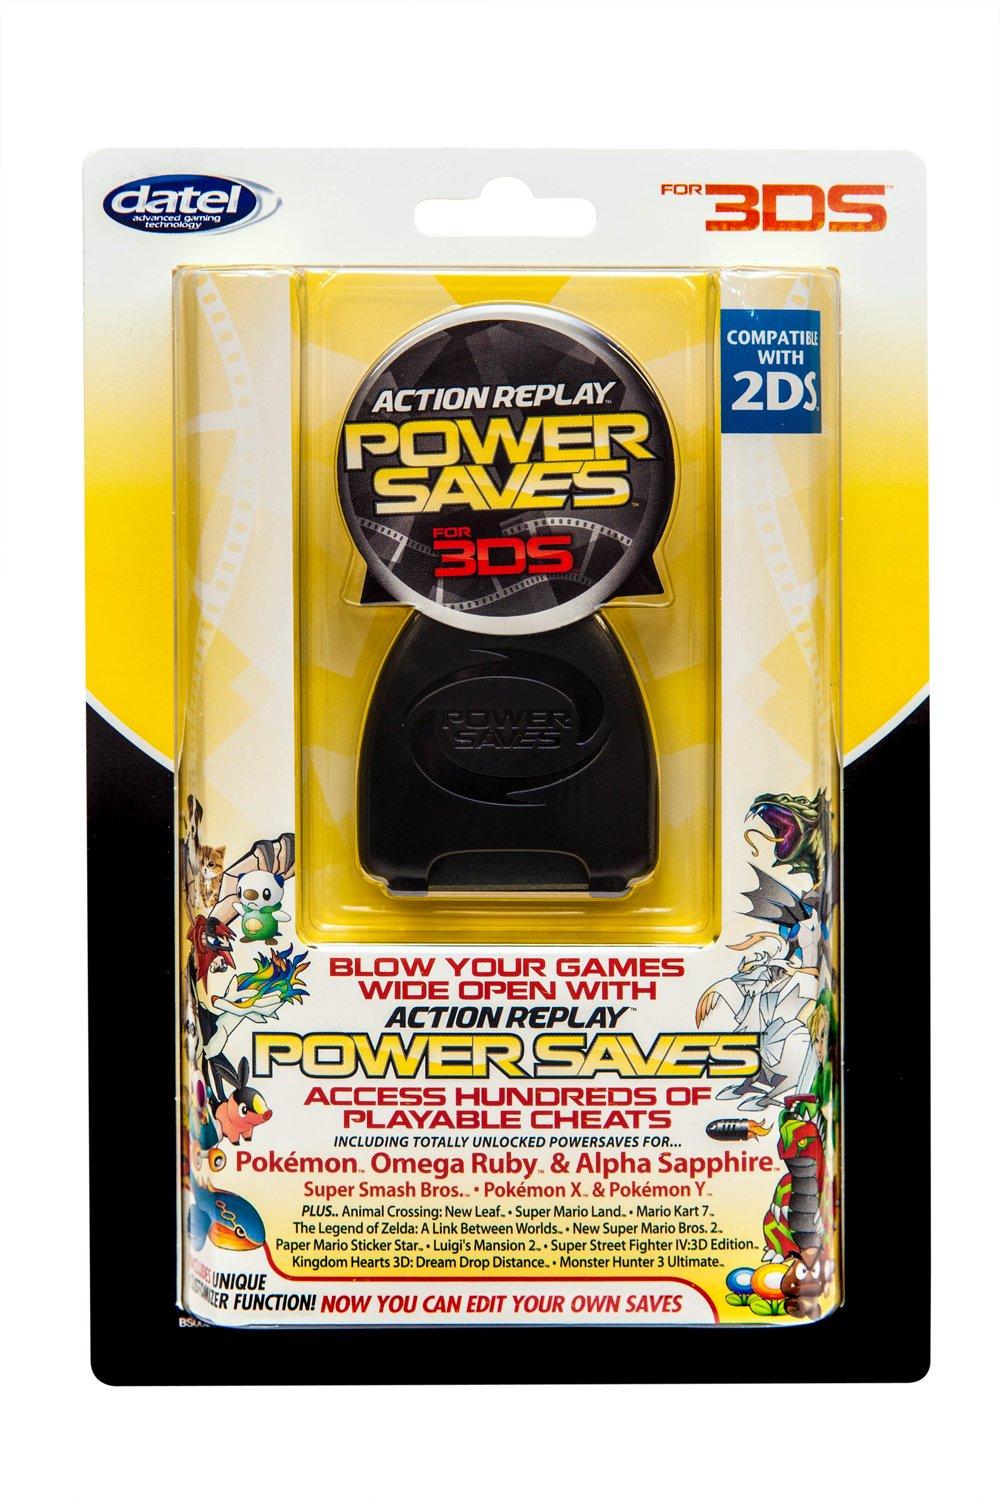 Action Replay PowerSaves for Nintendo 3DS